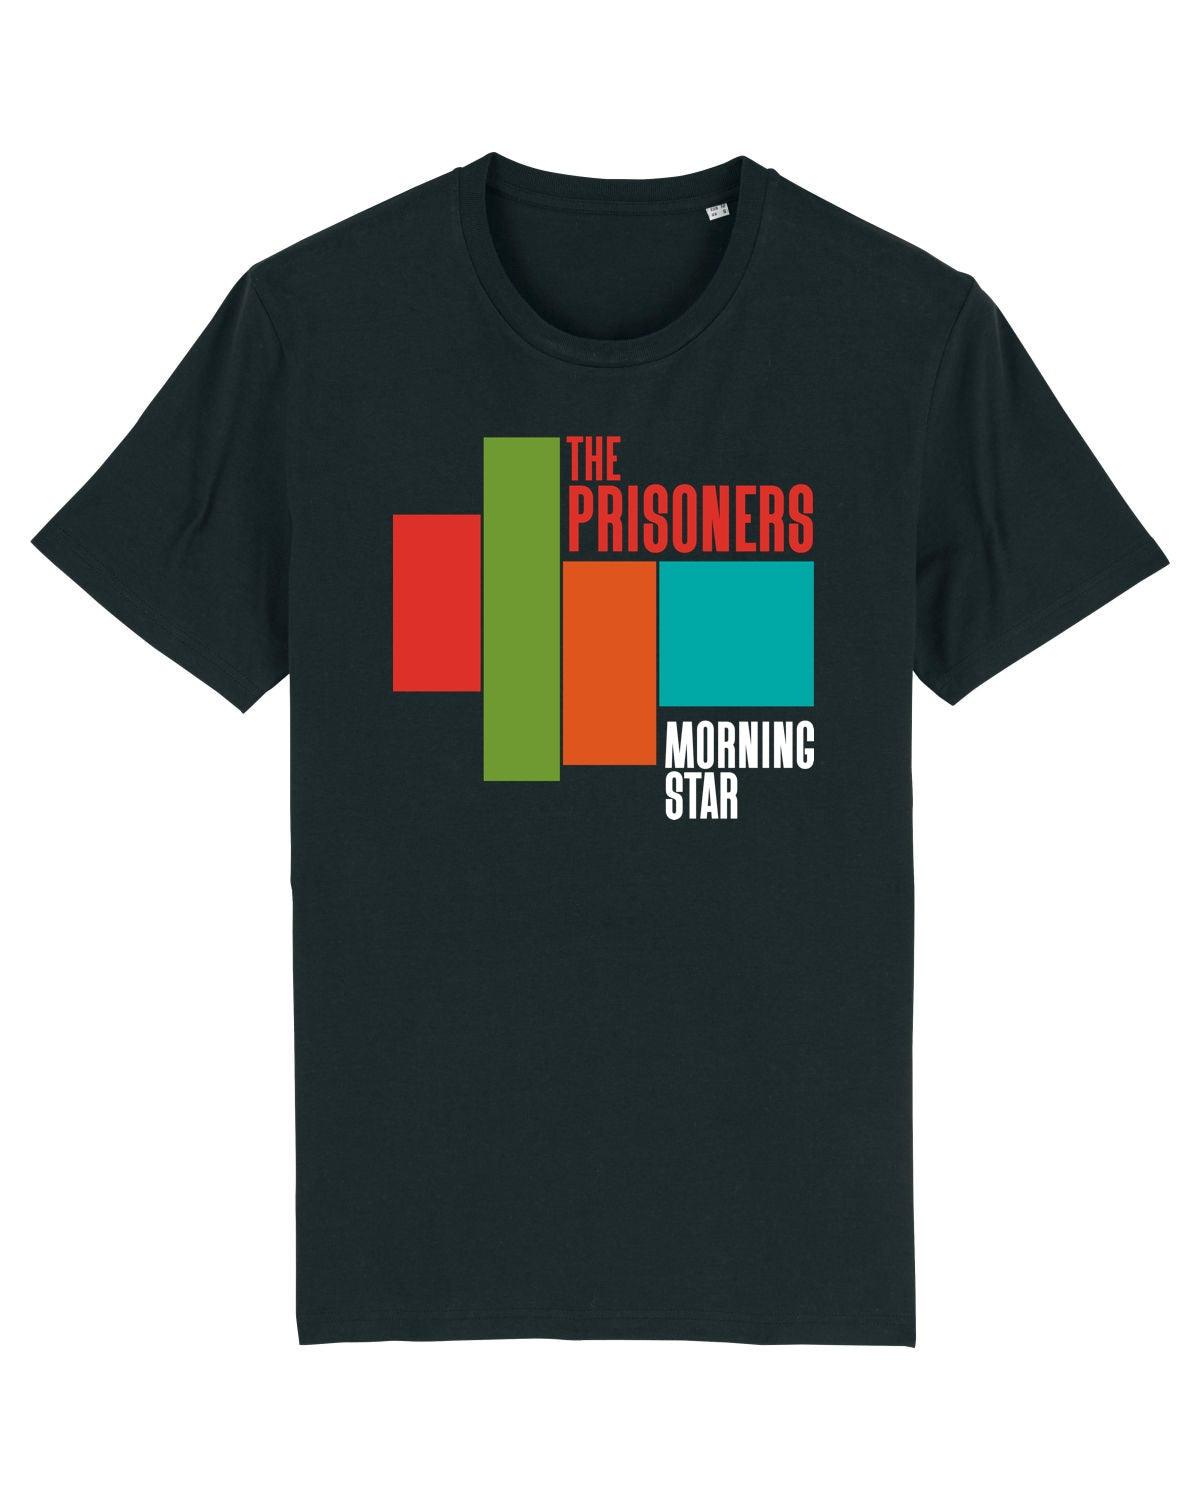 THE PRISONERS: The Rondhouse Morning Sun: **COLLECTION ONLY** FROM THE ROUNDHOUSE: T-Shirt Official Merchandise by Sound is Colour. - SOUND IS COLOUR